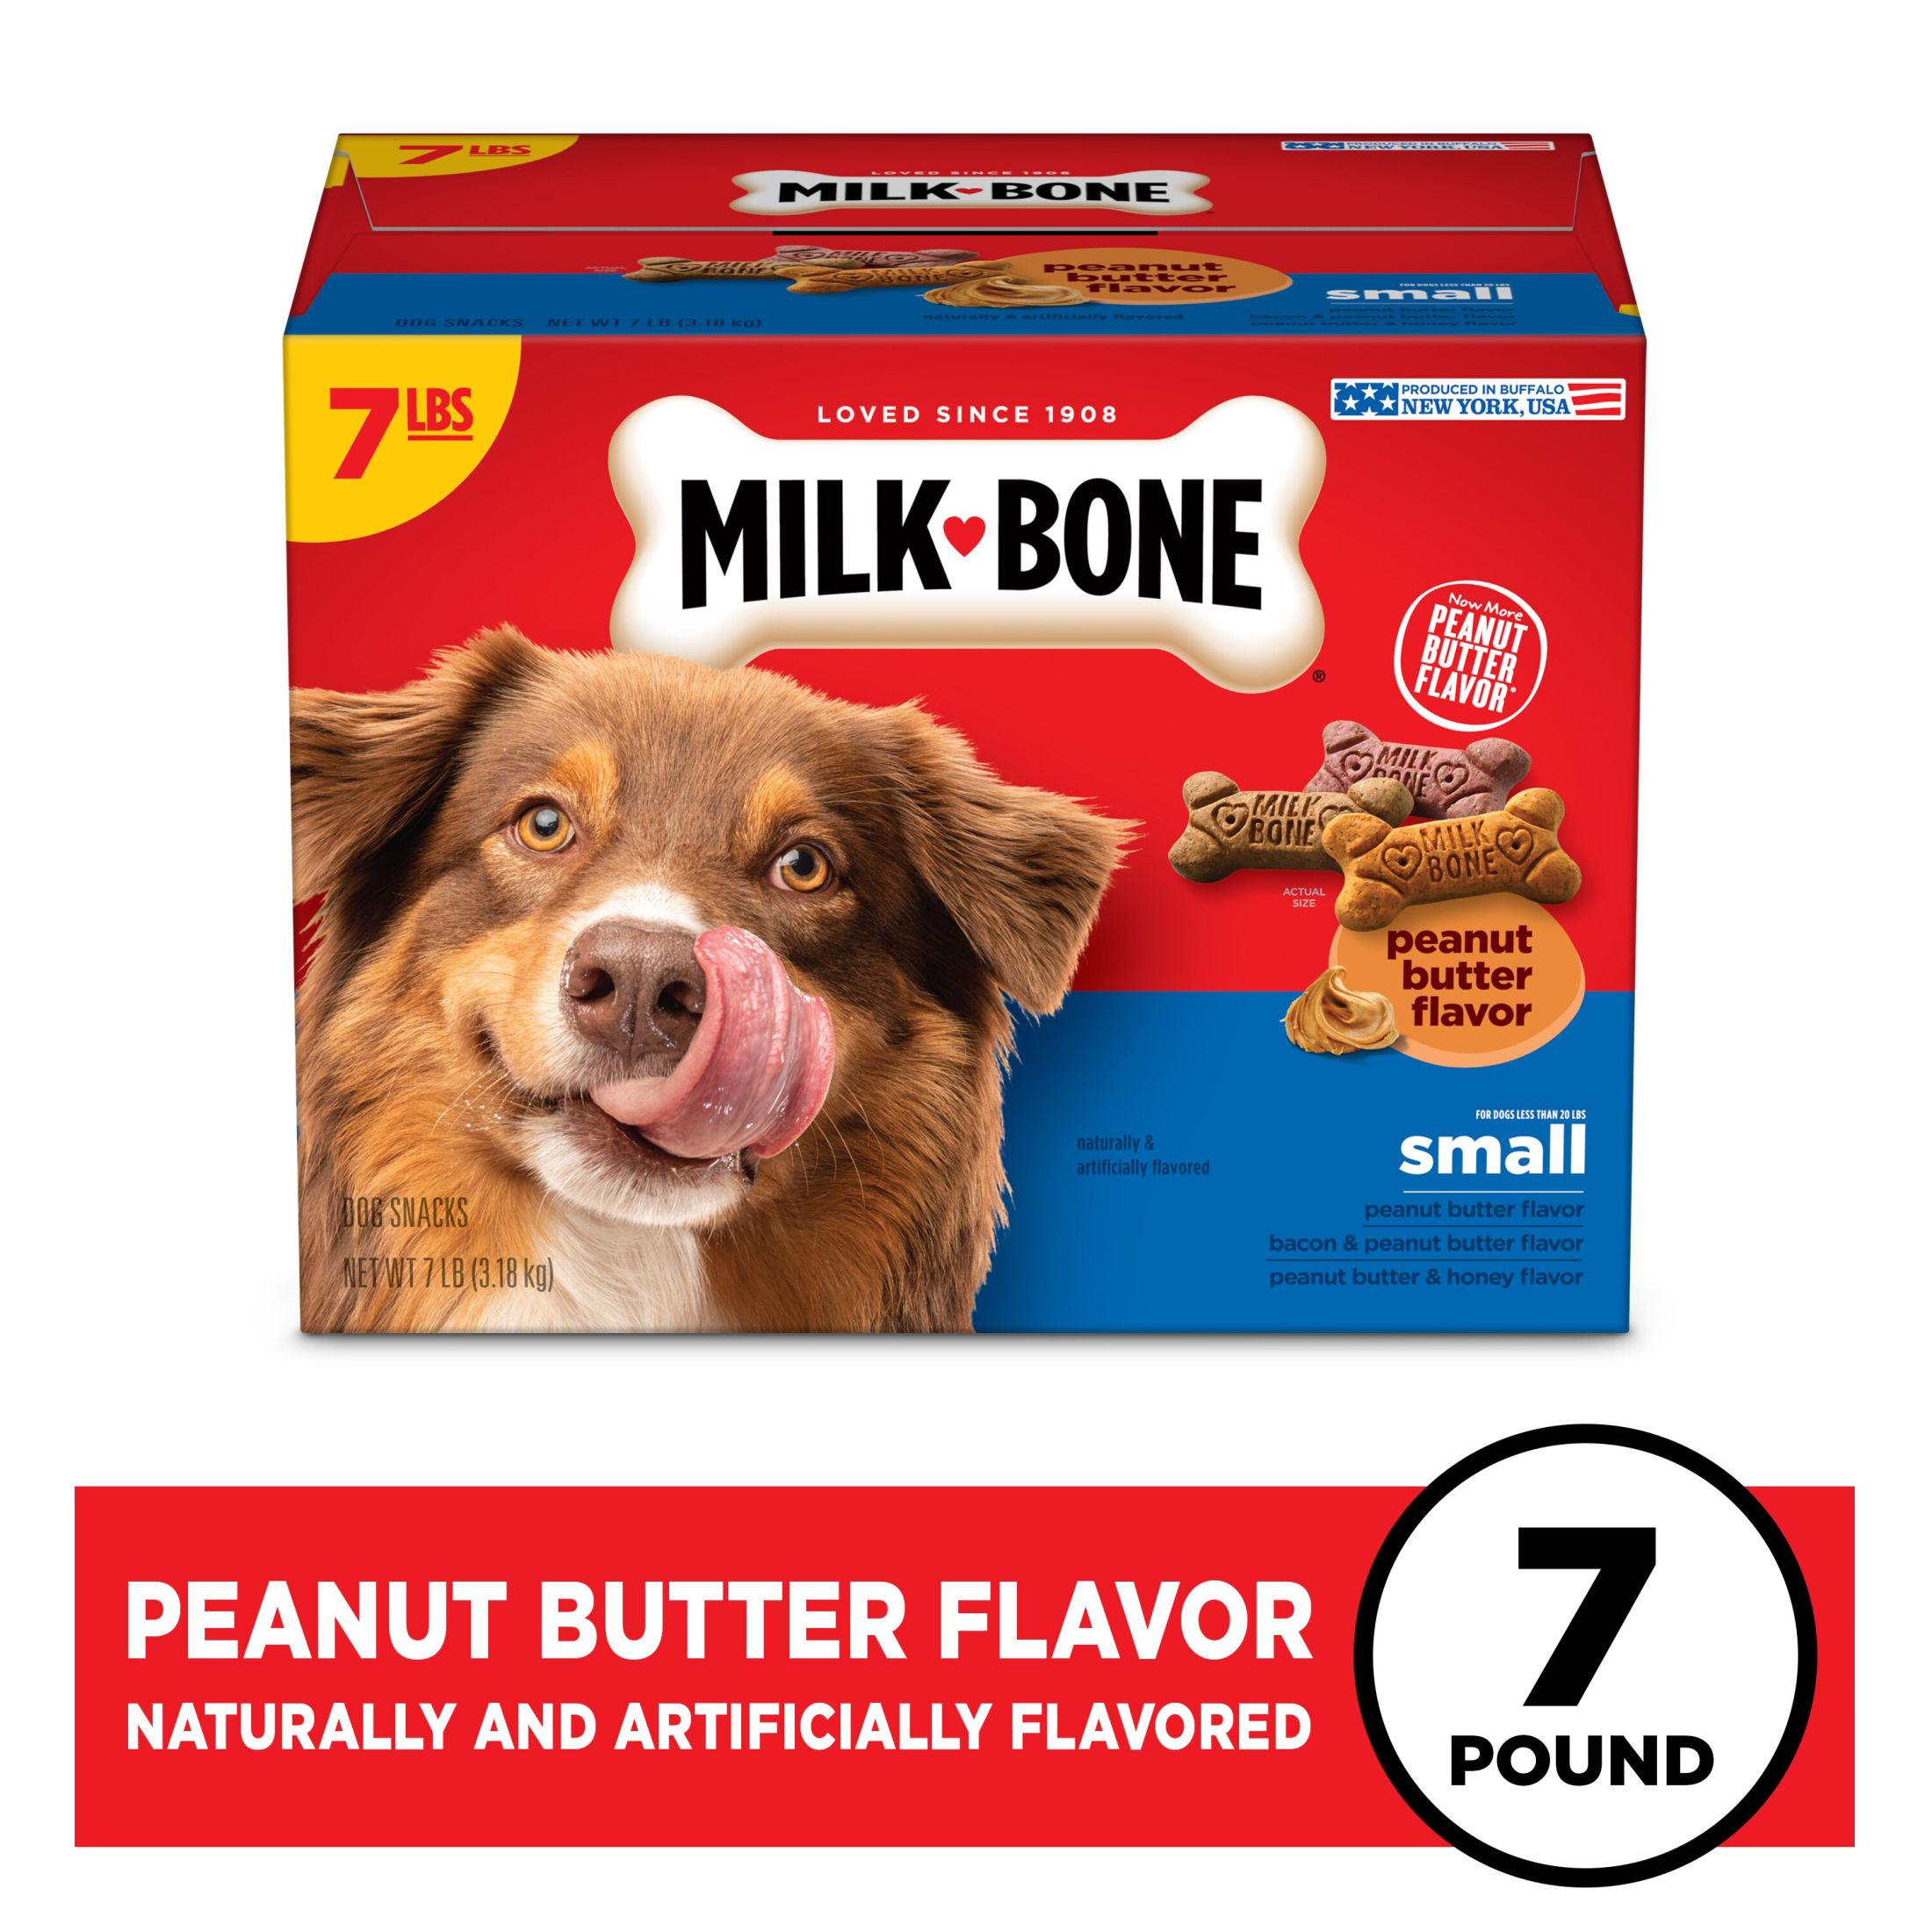 Milk-Bone Peanut Butter Flavor Naturally & Artificially Flavored Dog Biscuits, Crunchy Dog Treats, 7 Pounds - image 3 of 10